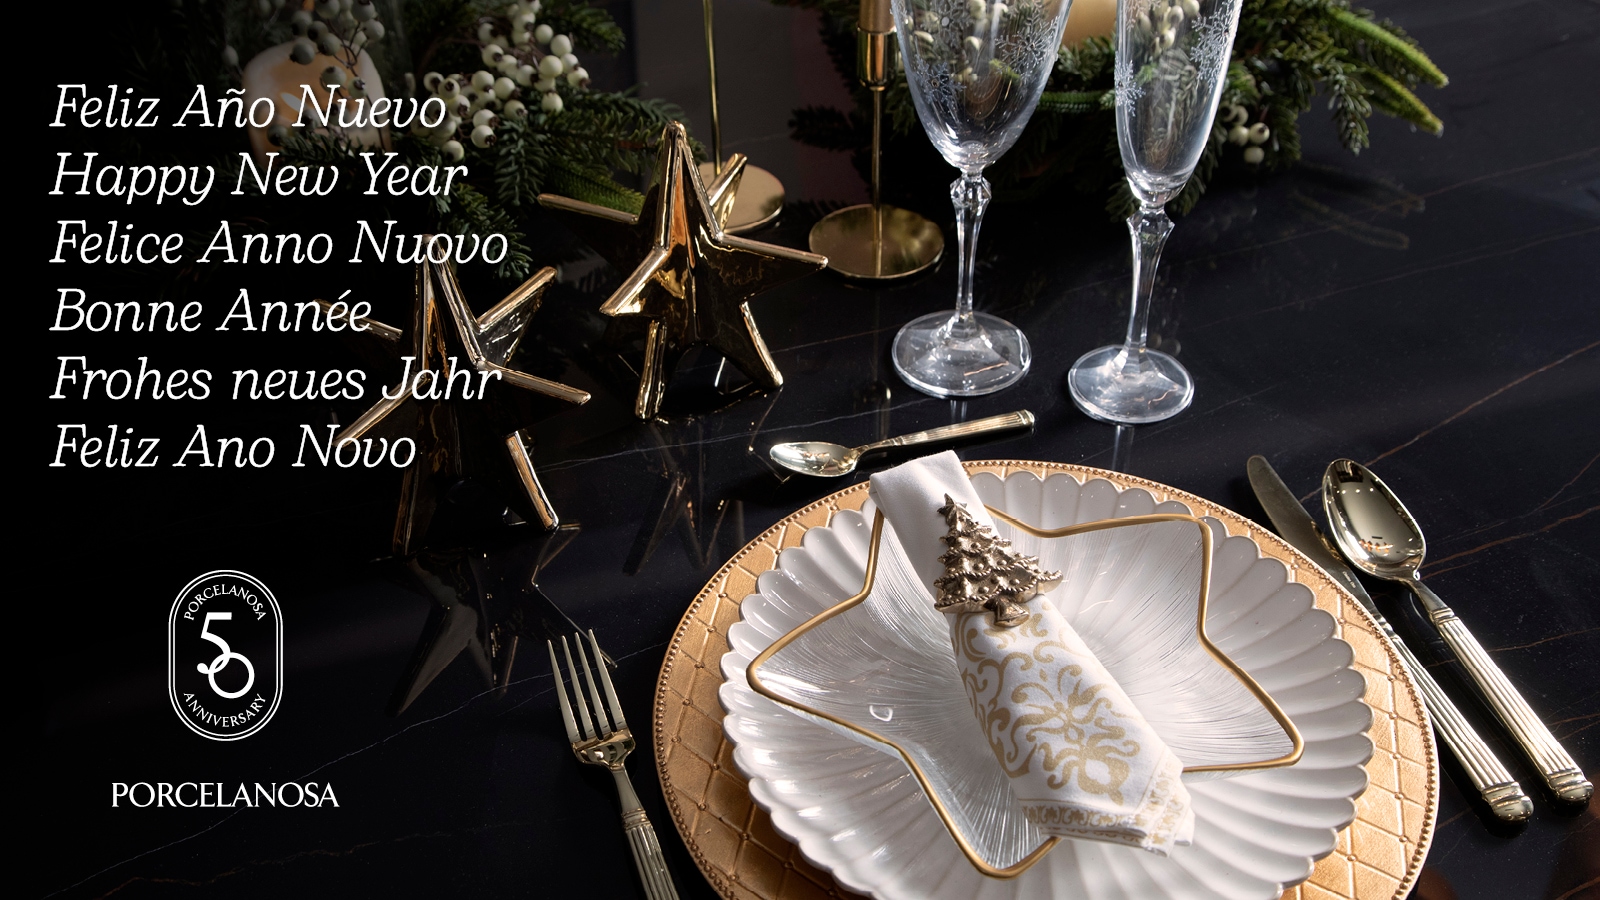 PORCELANOSA wishes you a happy New Year